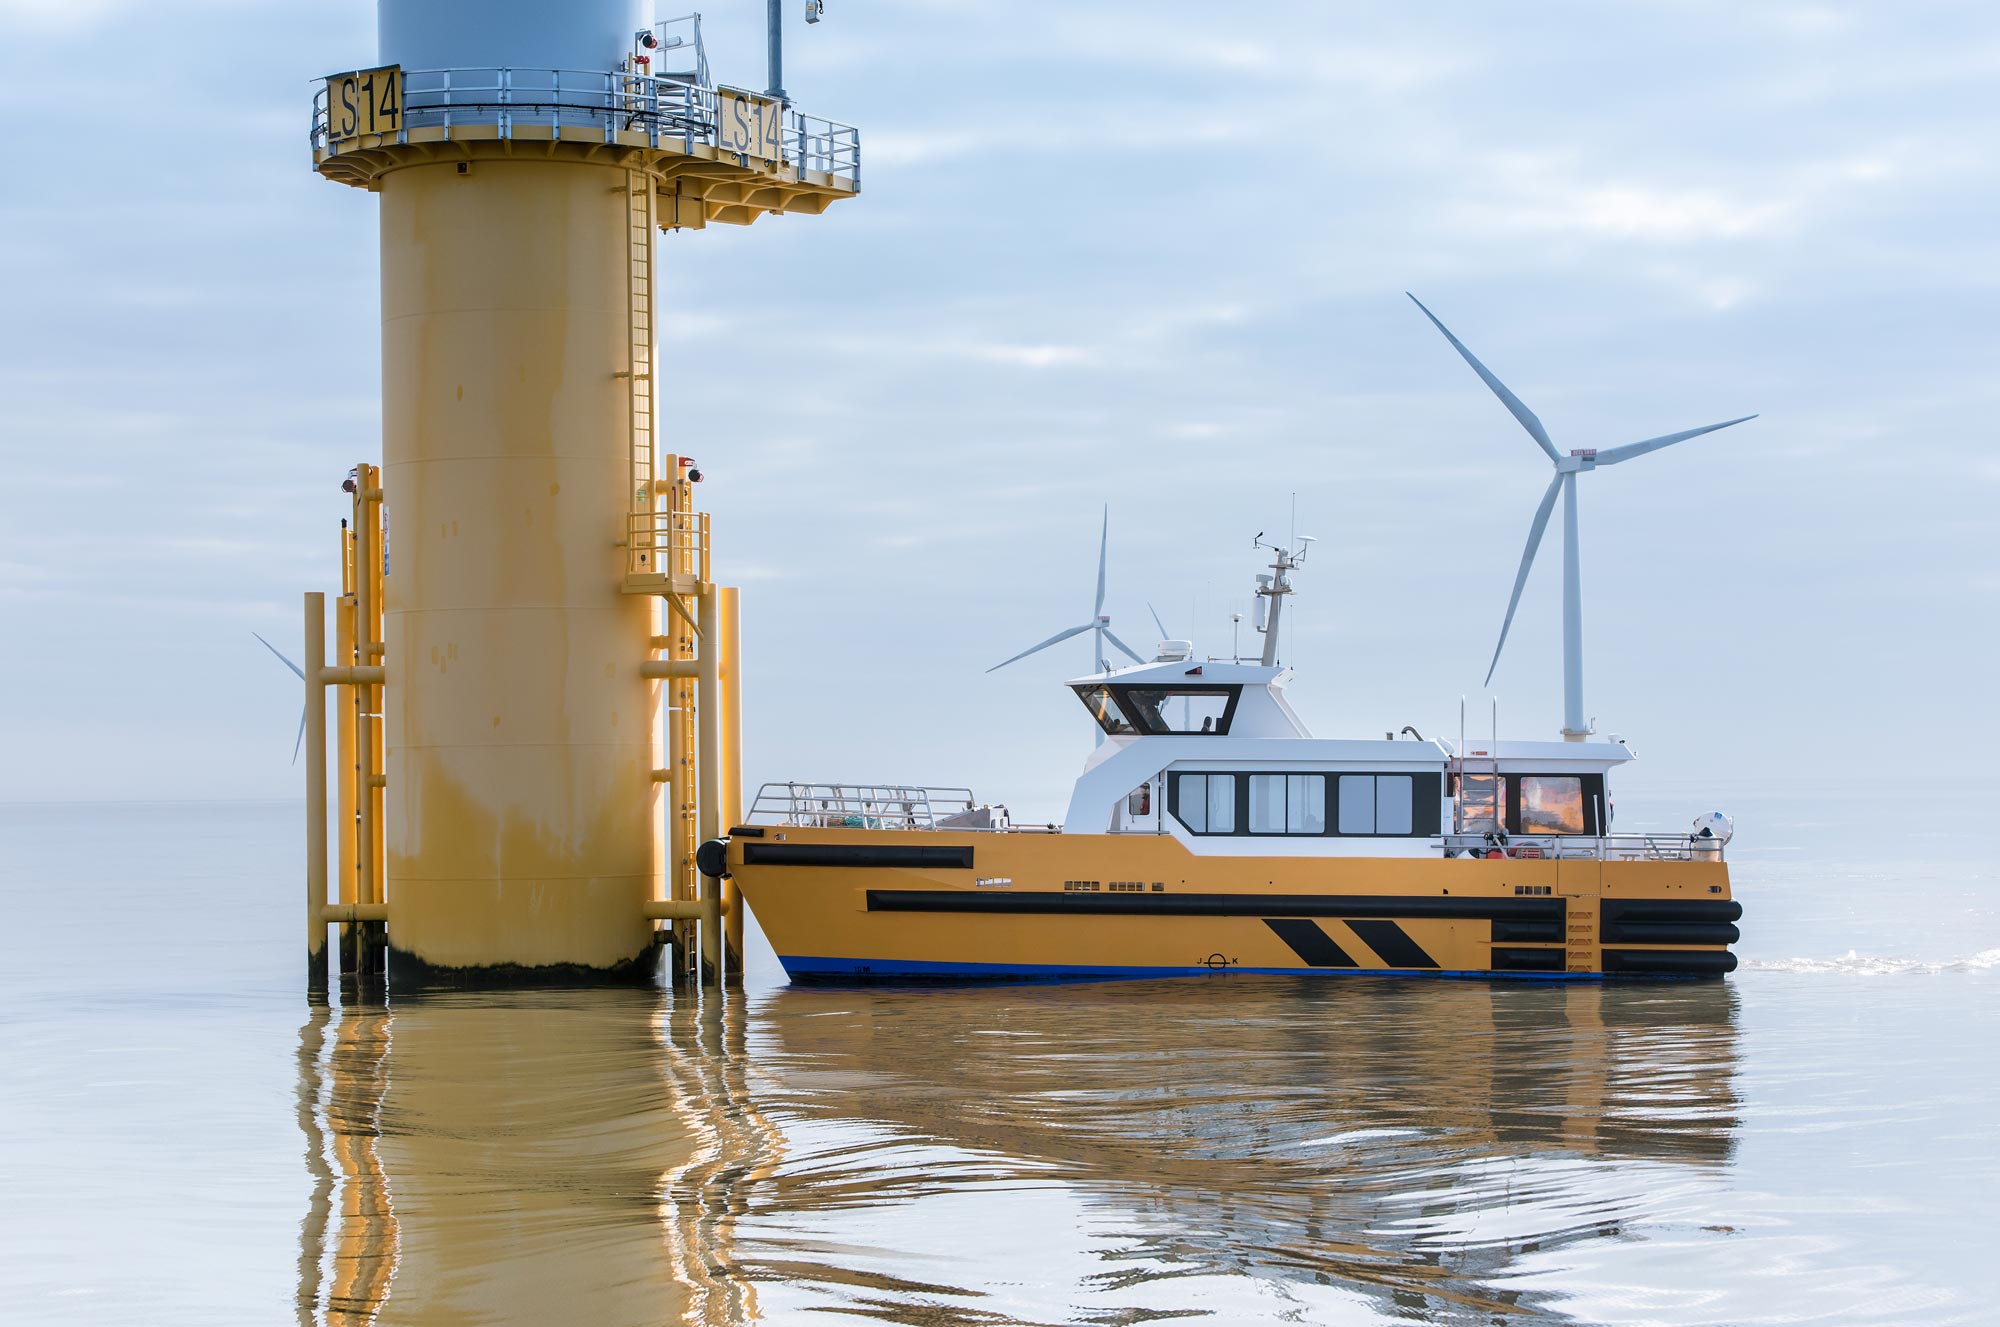 Hakai Magazine: For Baby Cod, Offshore Wind Turbines Offer an Alluring Tone